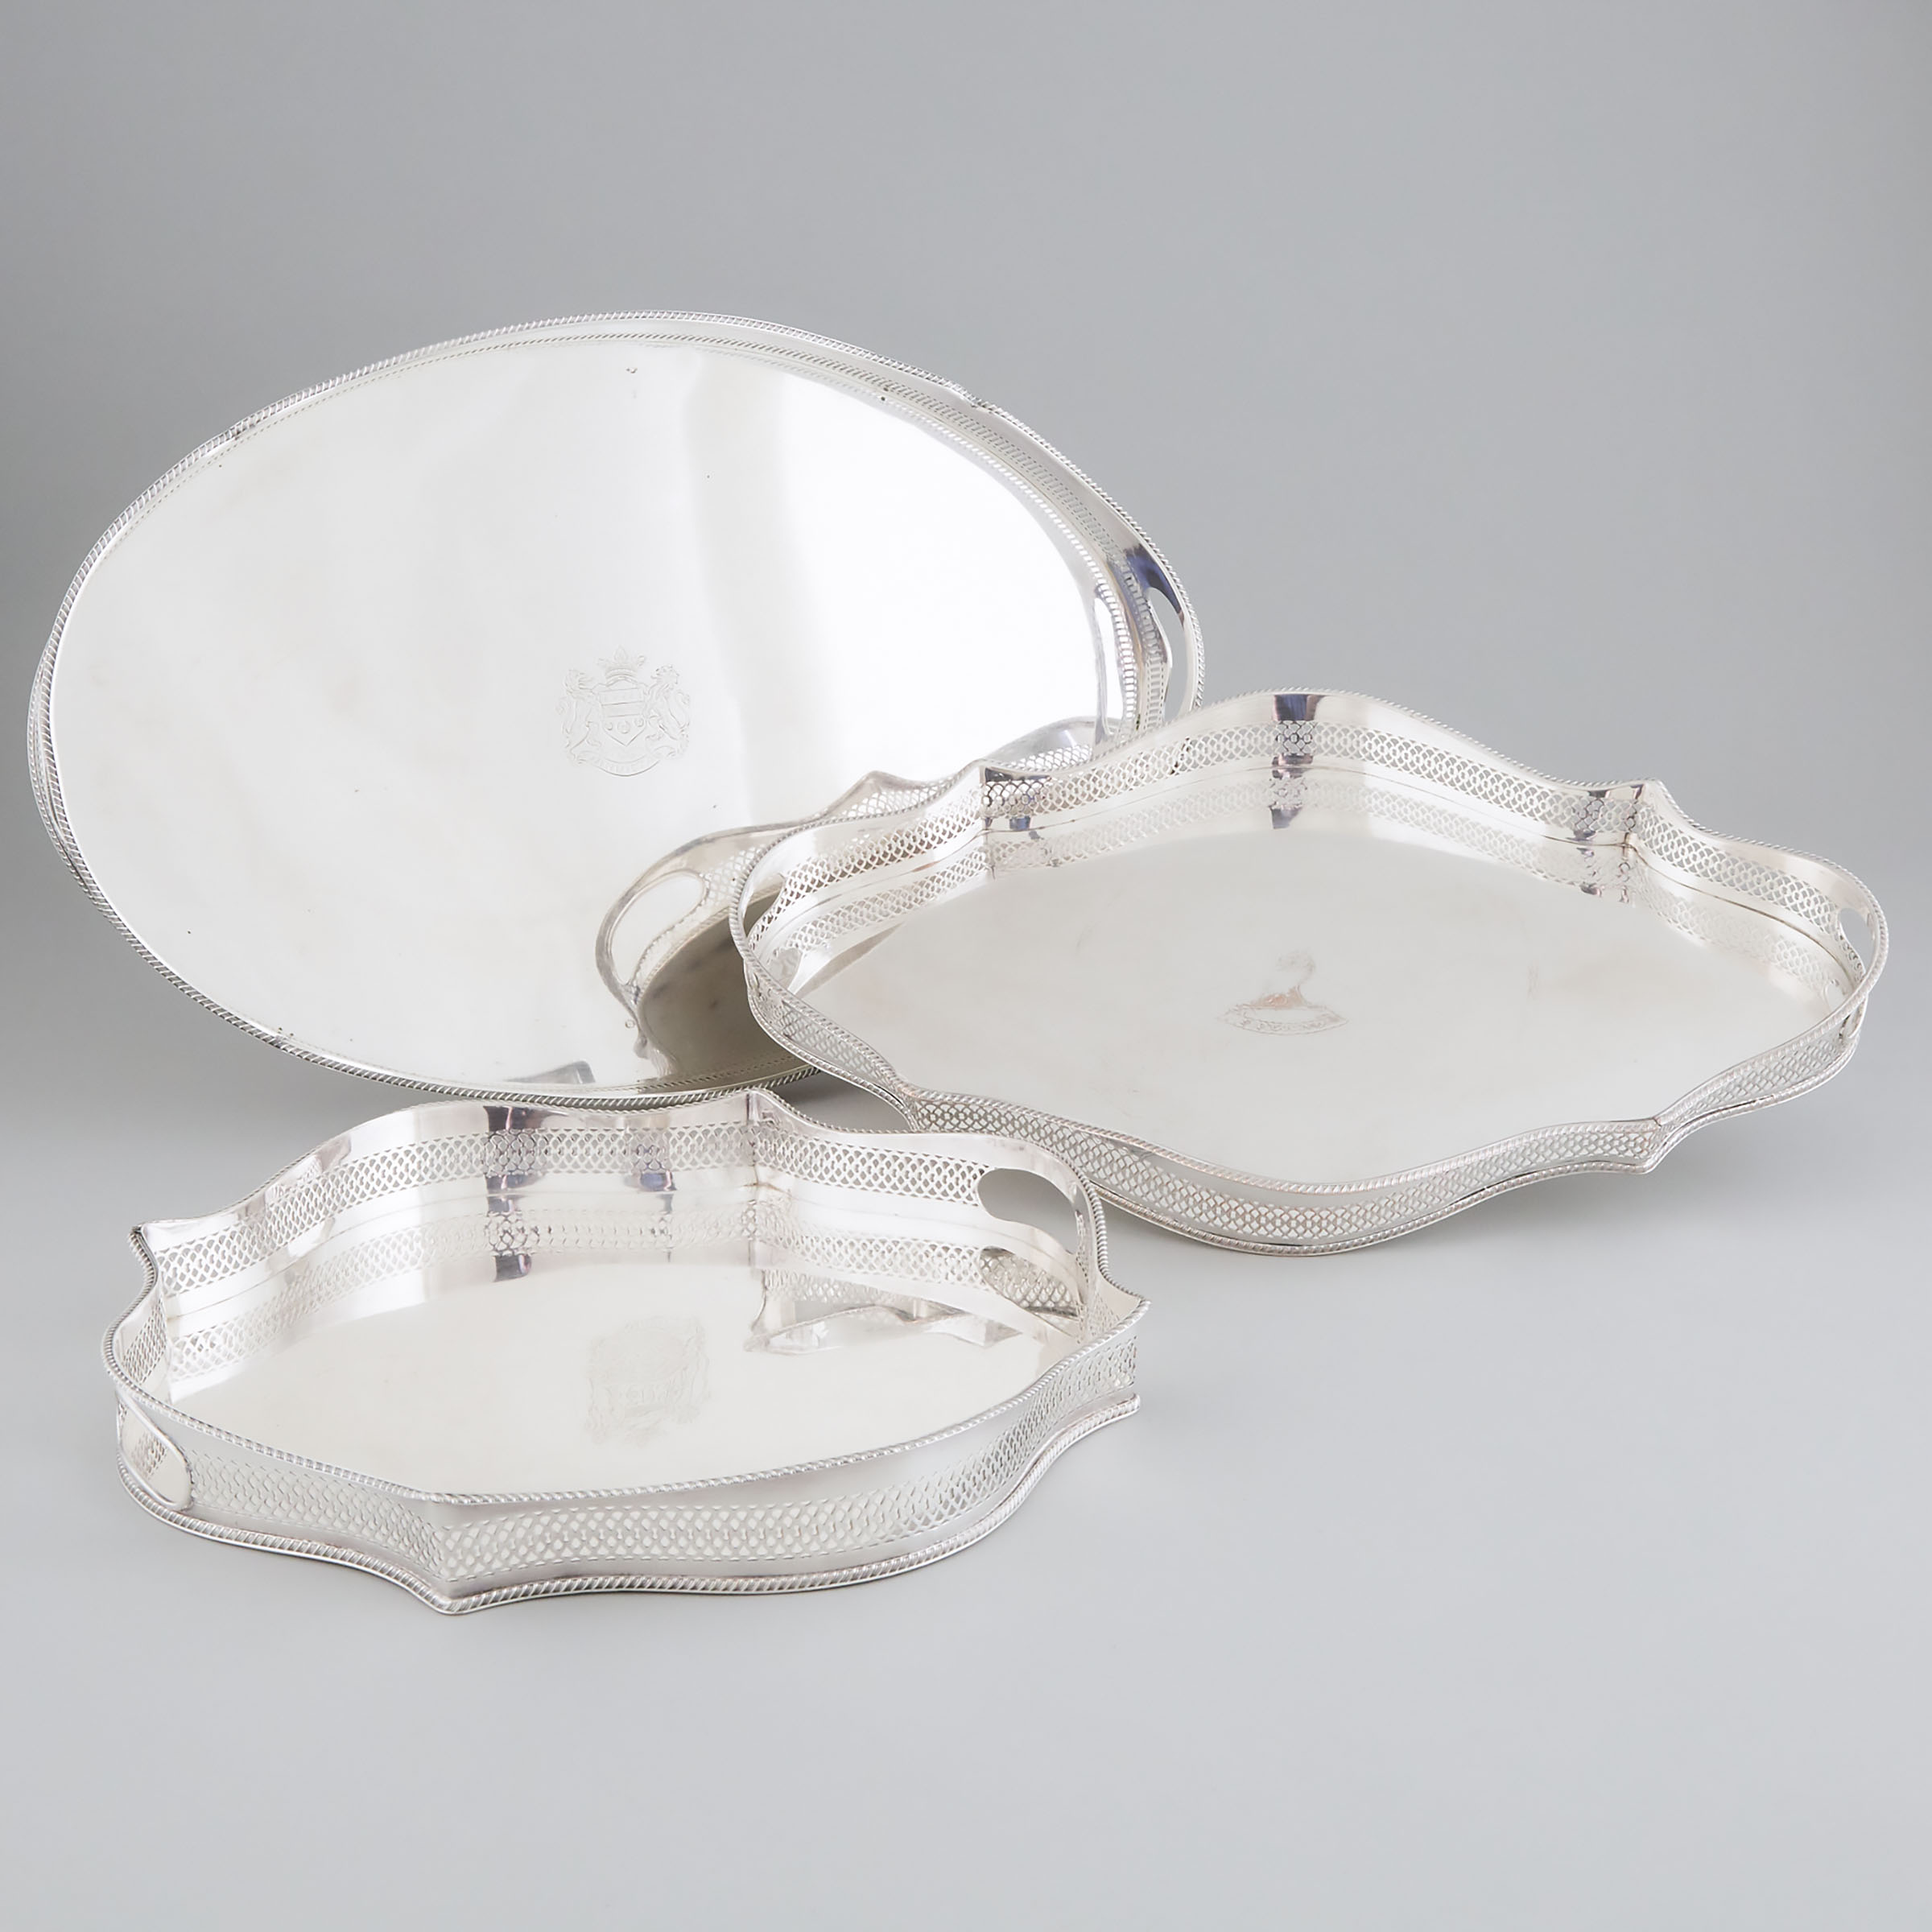 Three English Silver Plated Galleried Serving Trays, 20th century